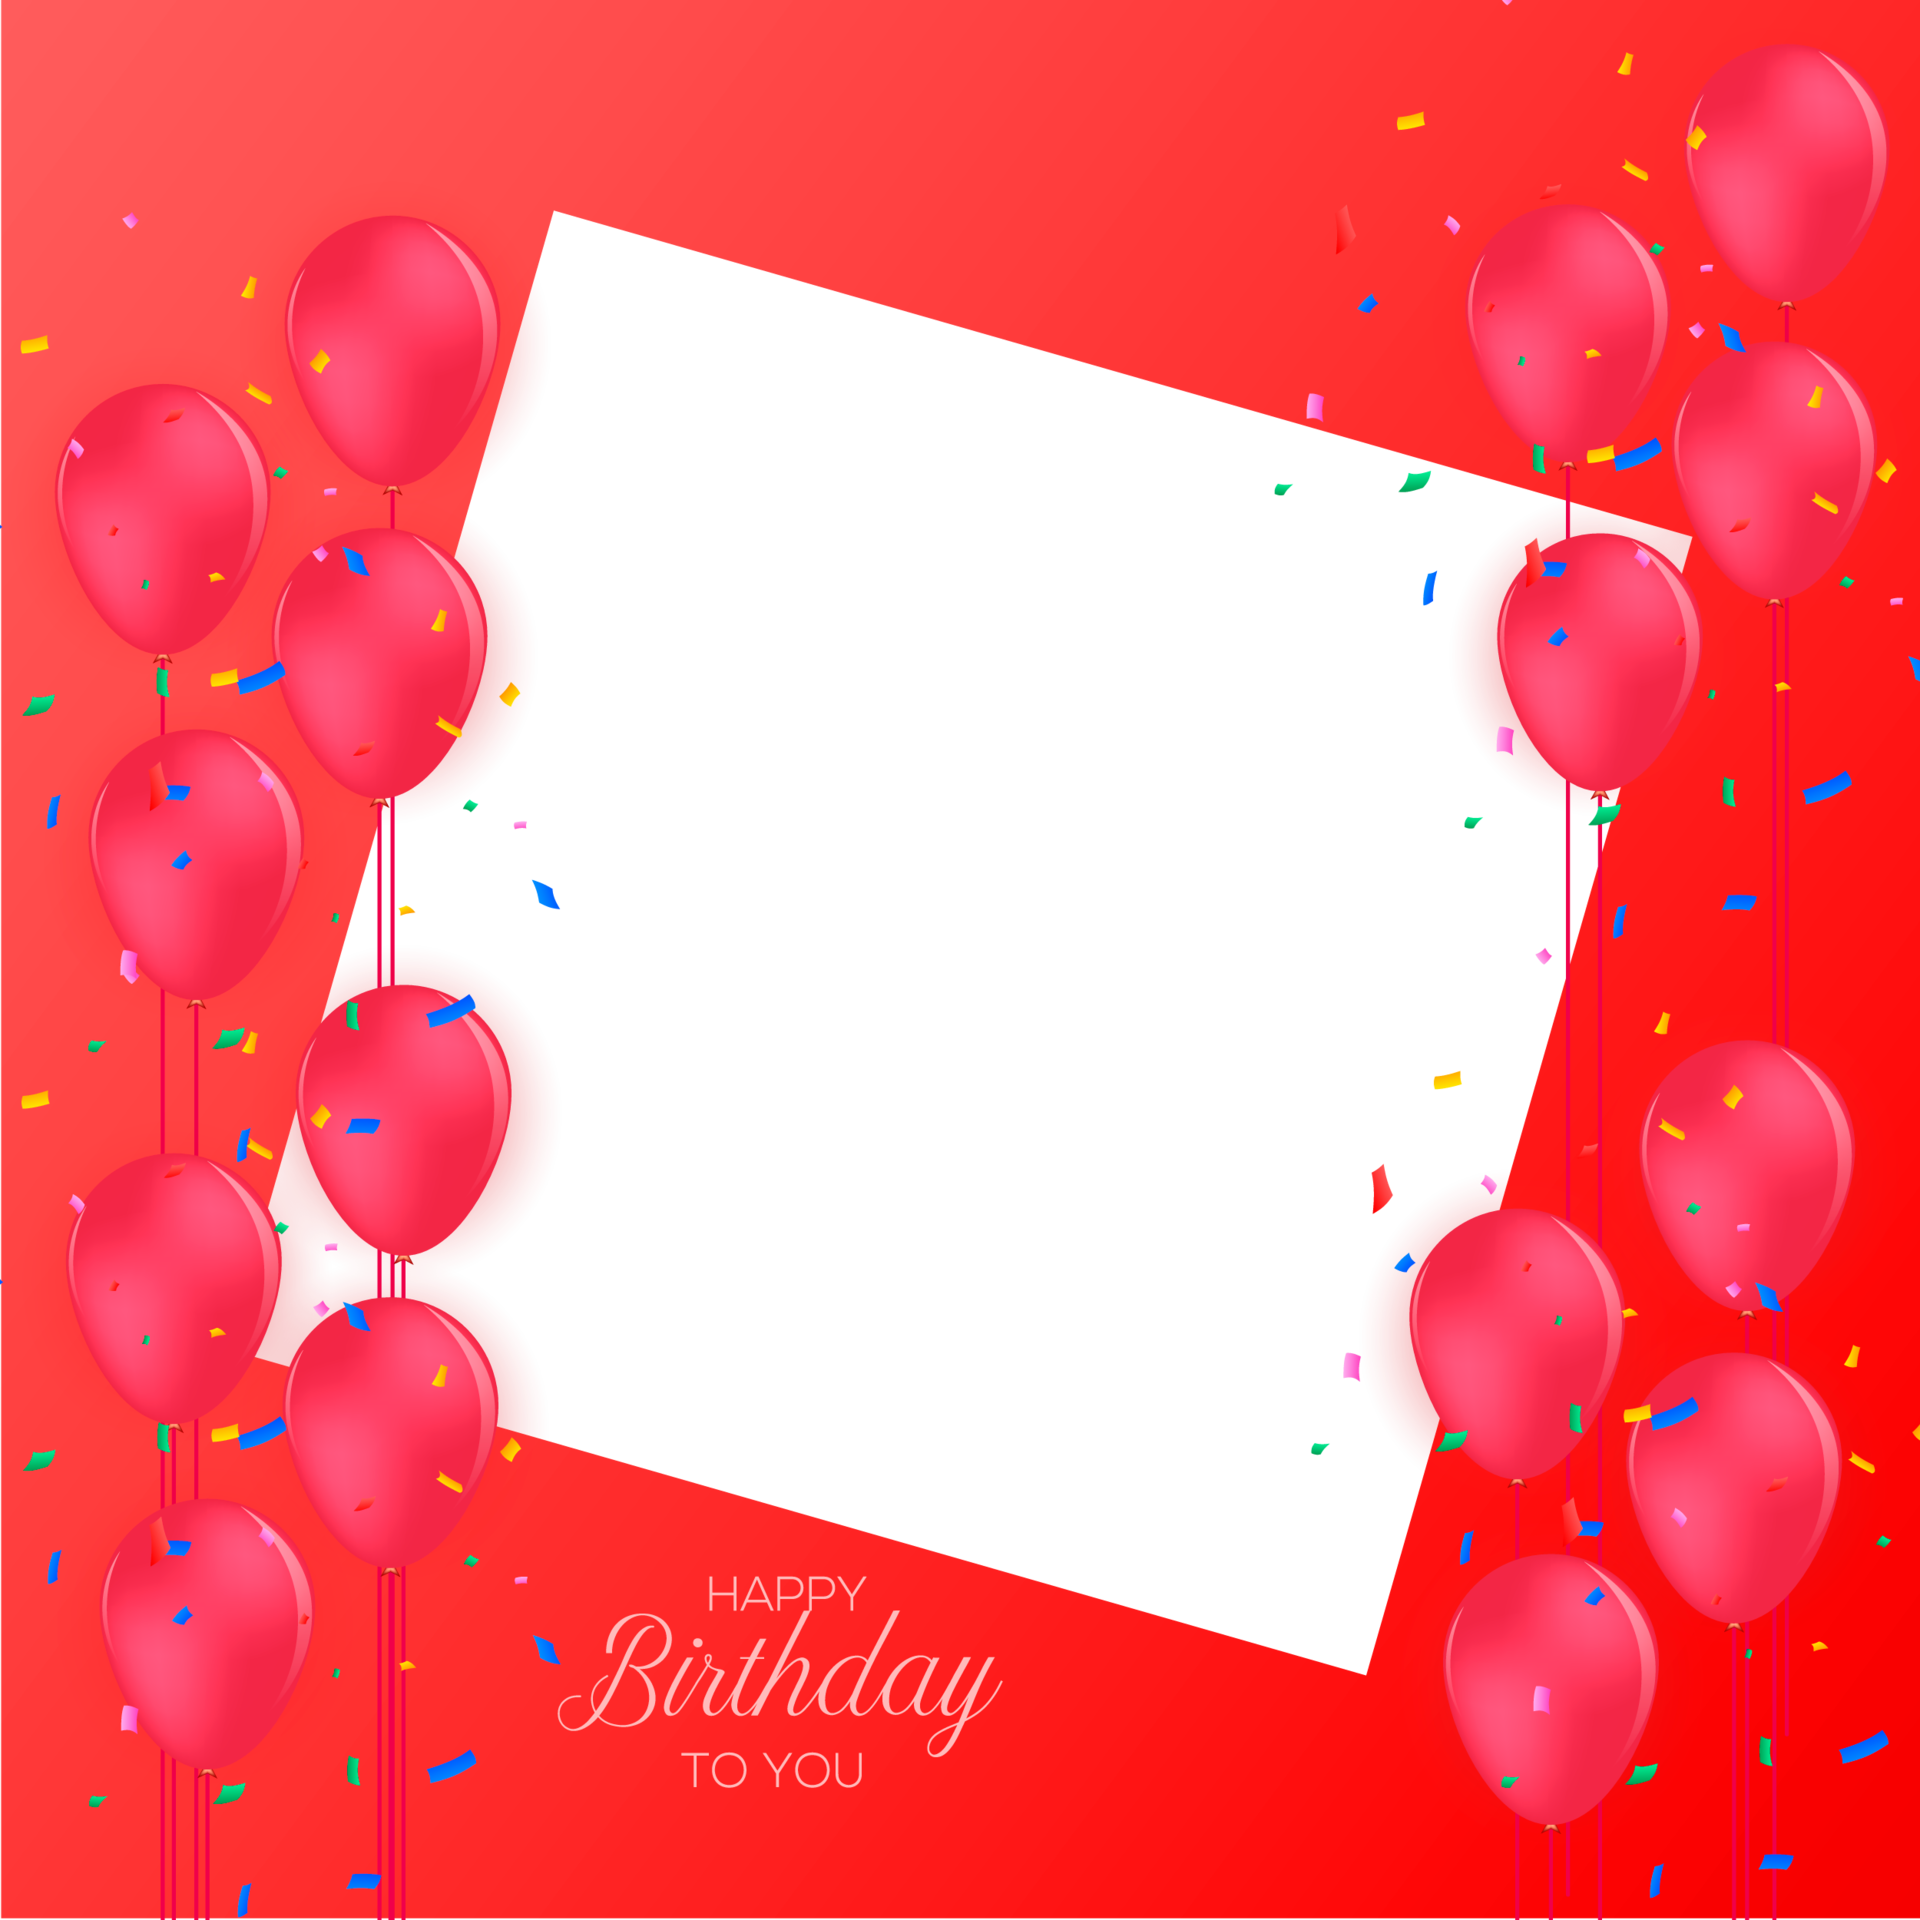 Birthday congratulations photo frame design with balloons 20574423 PNG